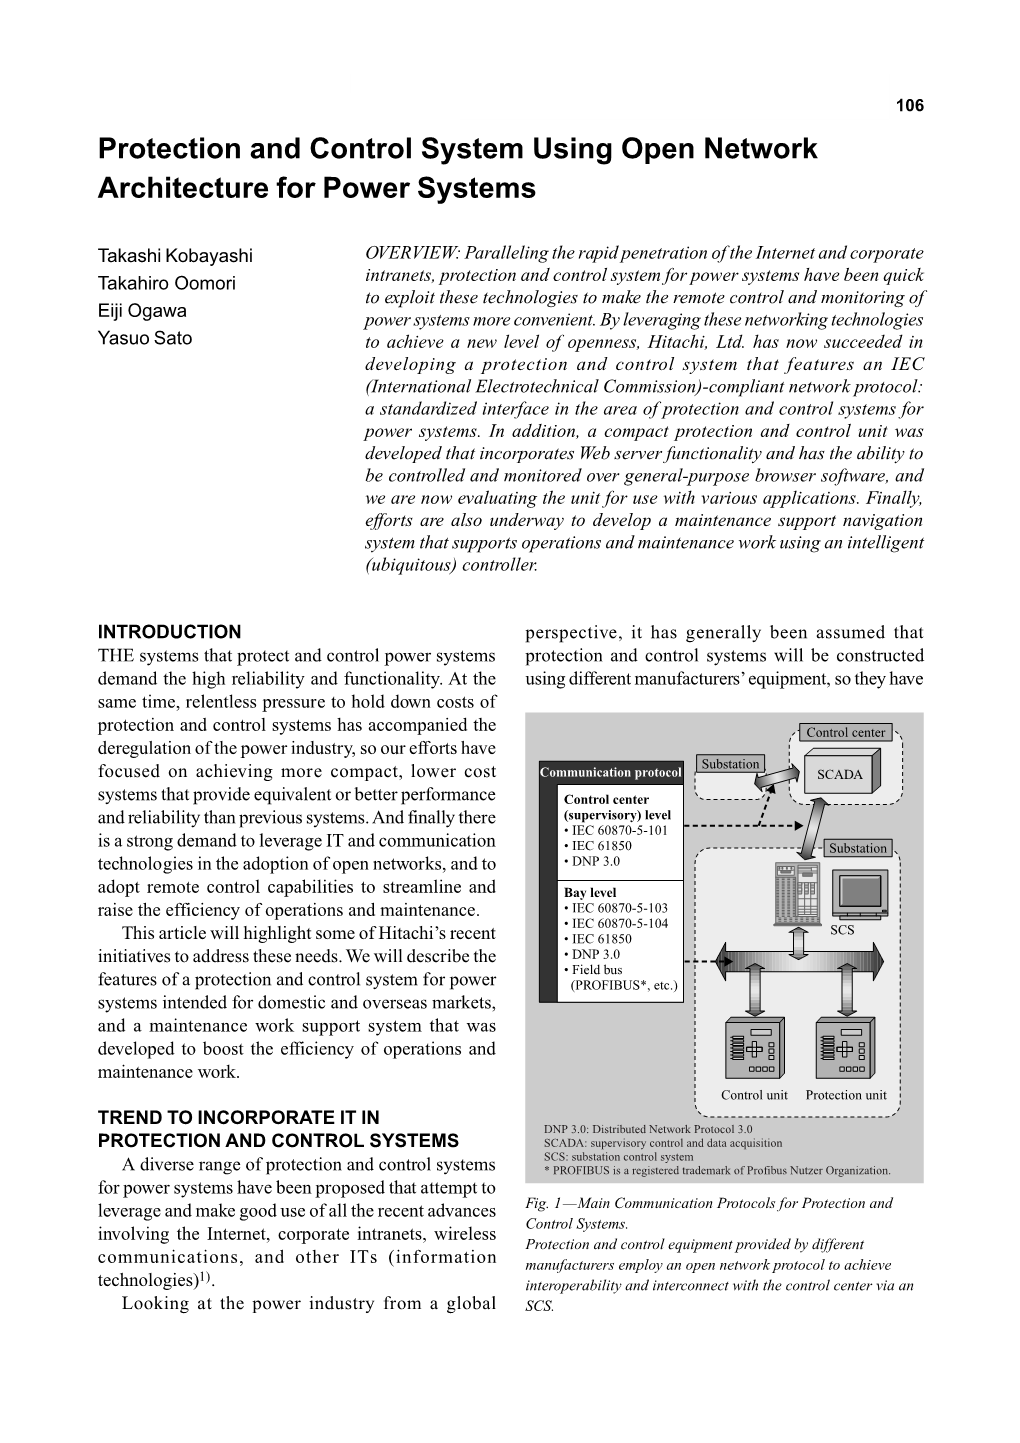 Protection and Control System Using Open Network Architecture for Power Systems 106 Protection and Control System Using Open Network Architecture for Power Systems